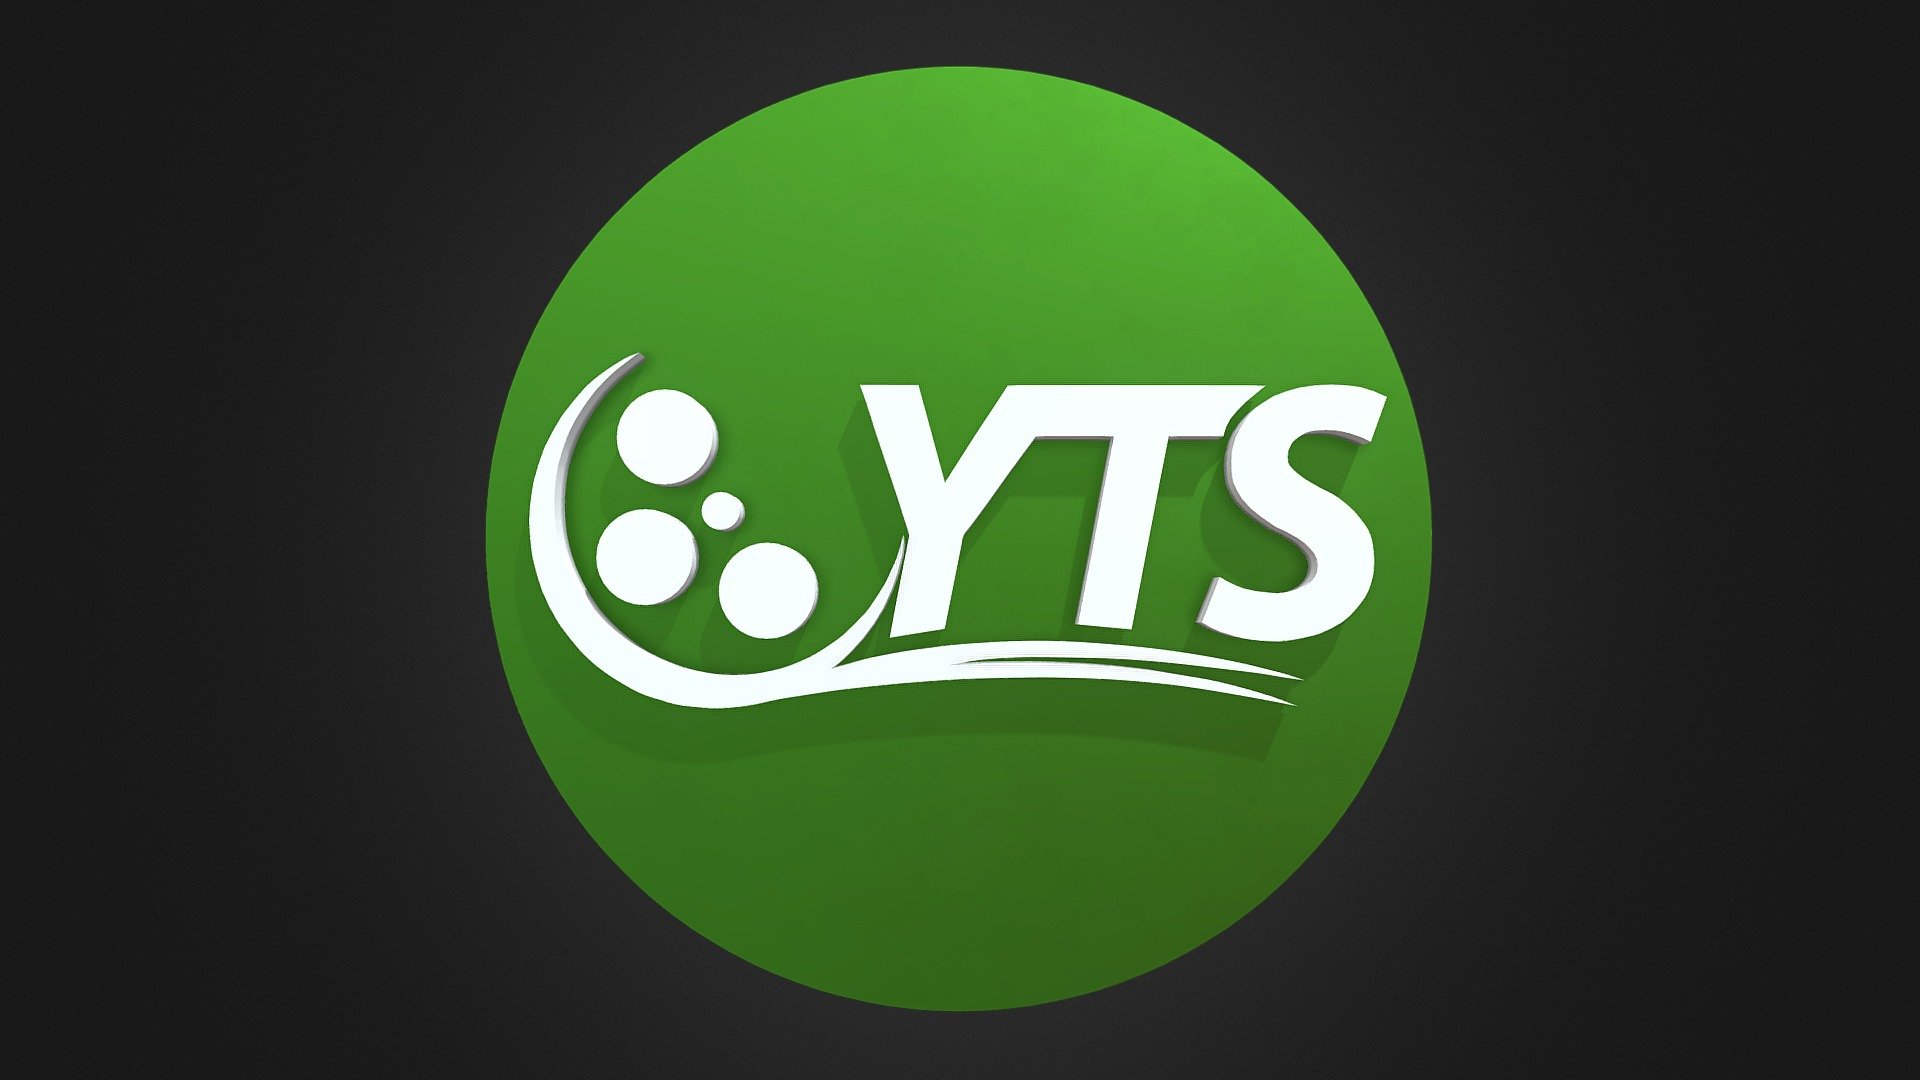 How is YIFY still live? - Quora